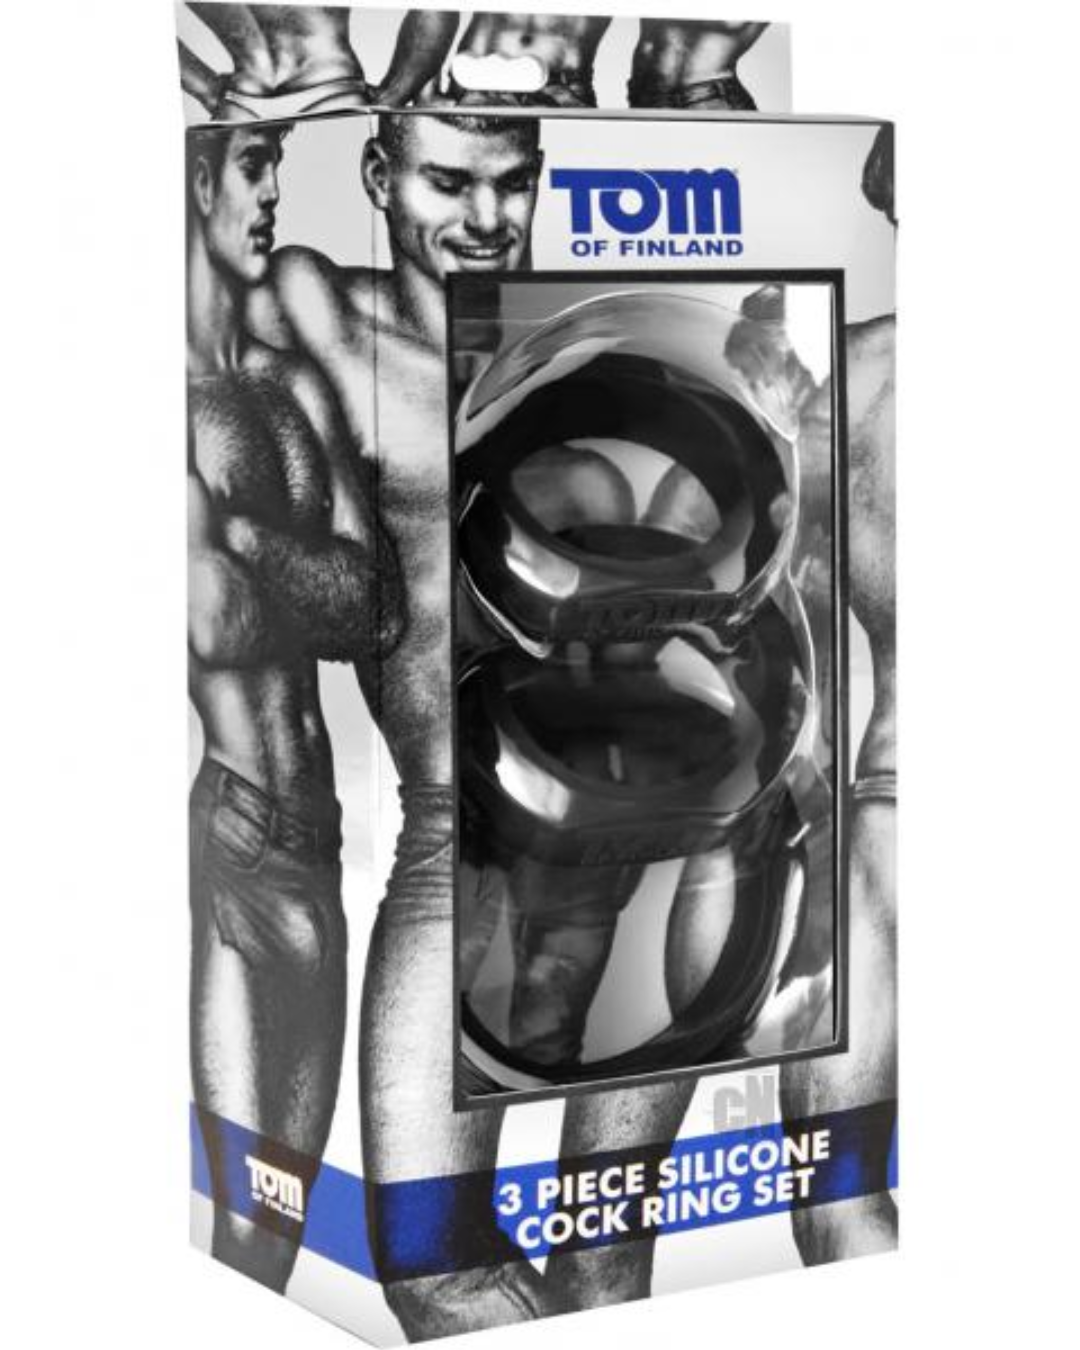 Tom of Finland 3 Piece Silicone Cock Ring Set - Black box